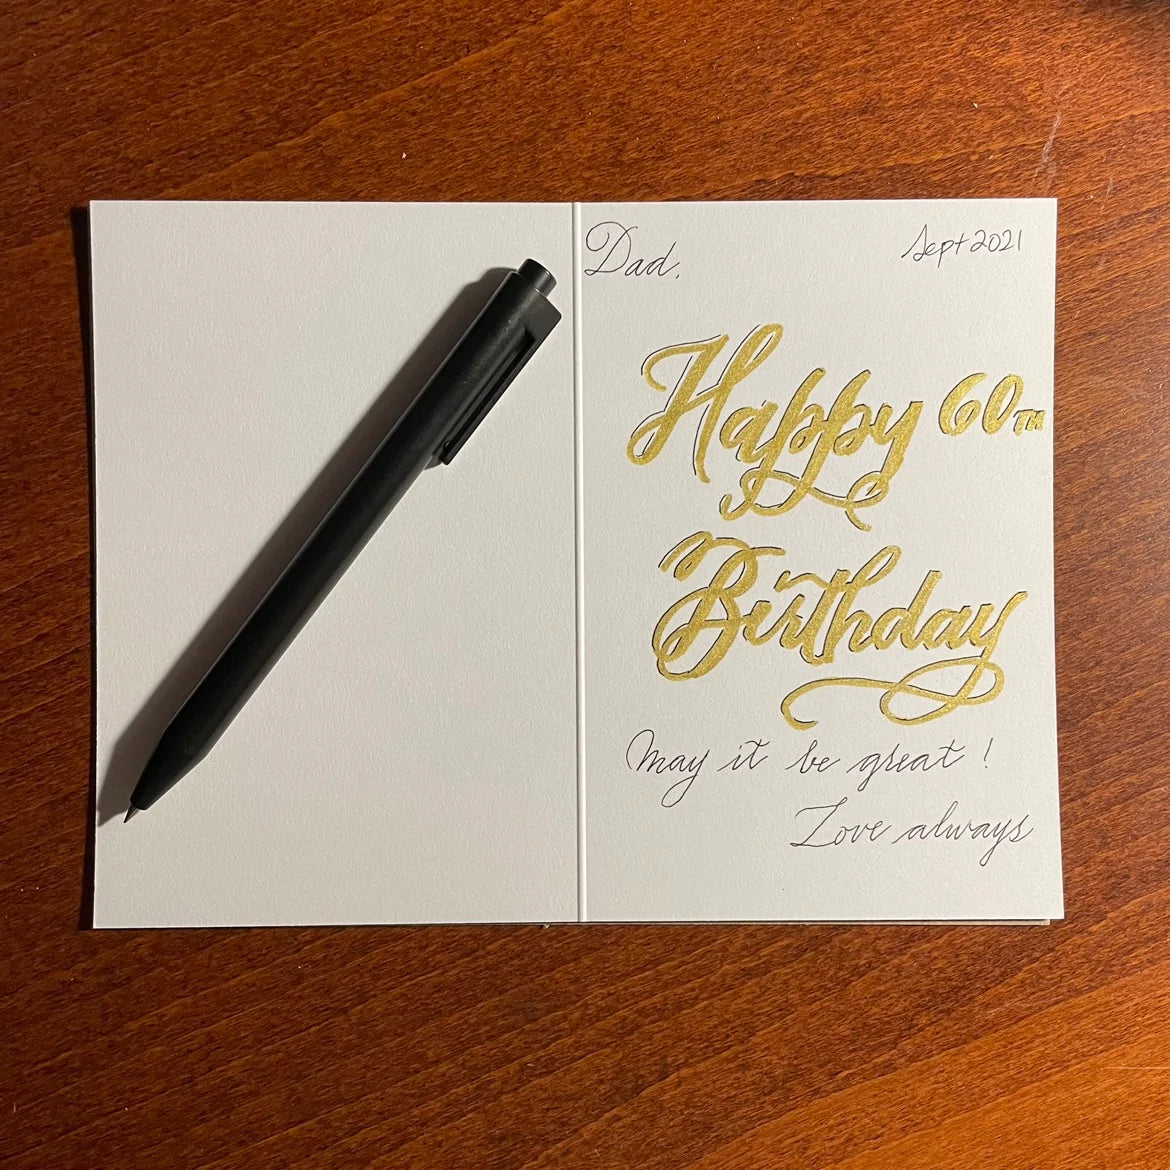 Add a note in calligraphy to your greeting cards | "Happy 60th Birthday, May it be great, love always" - Custom services by Nibs and Scripts